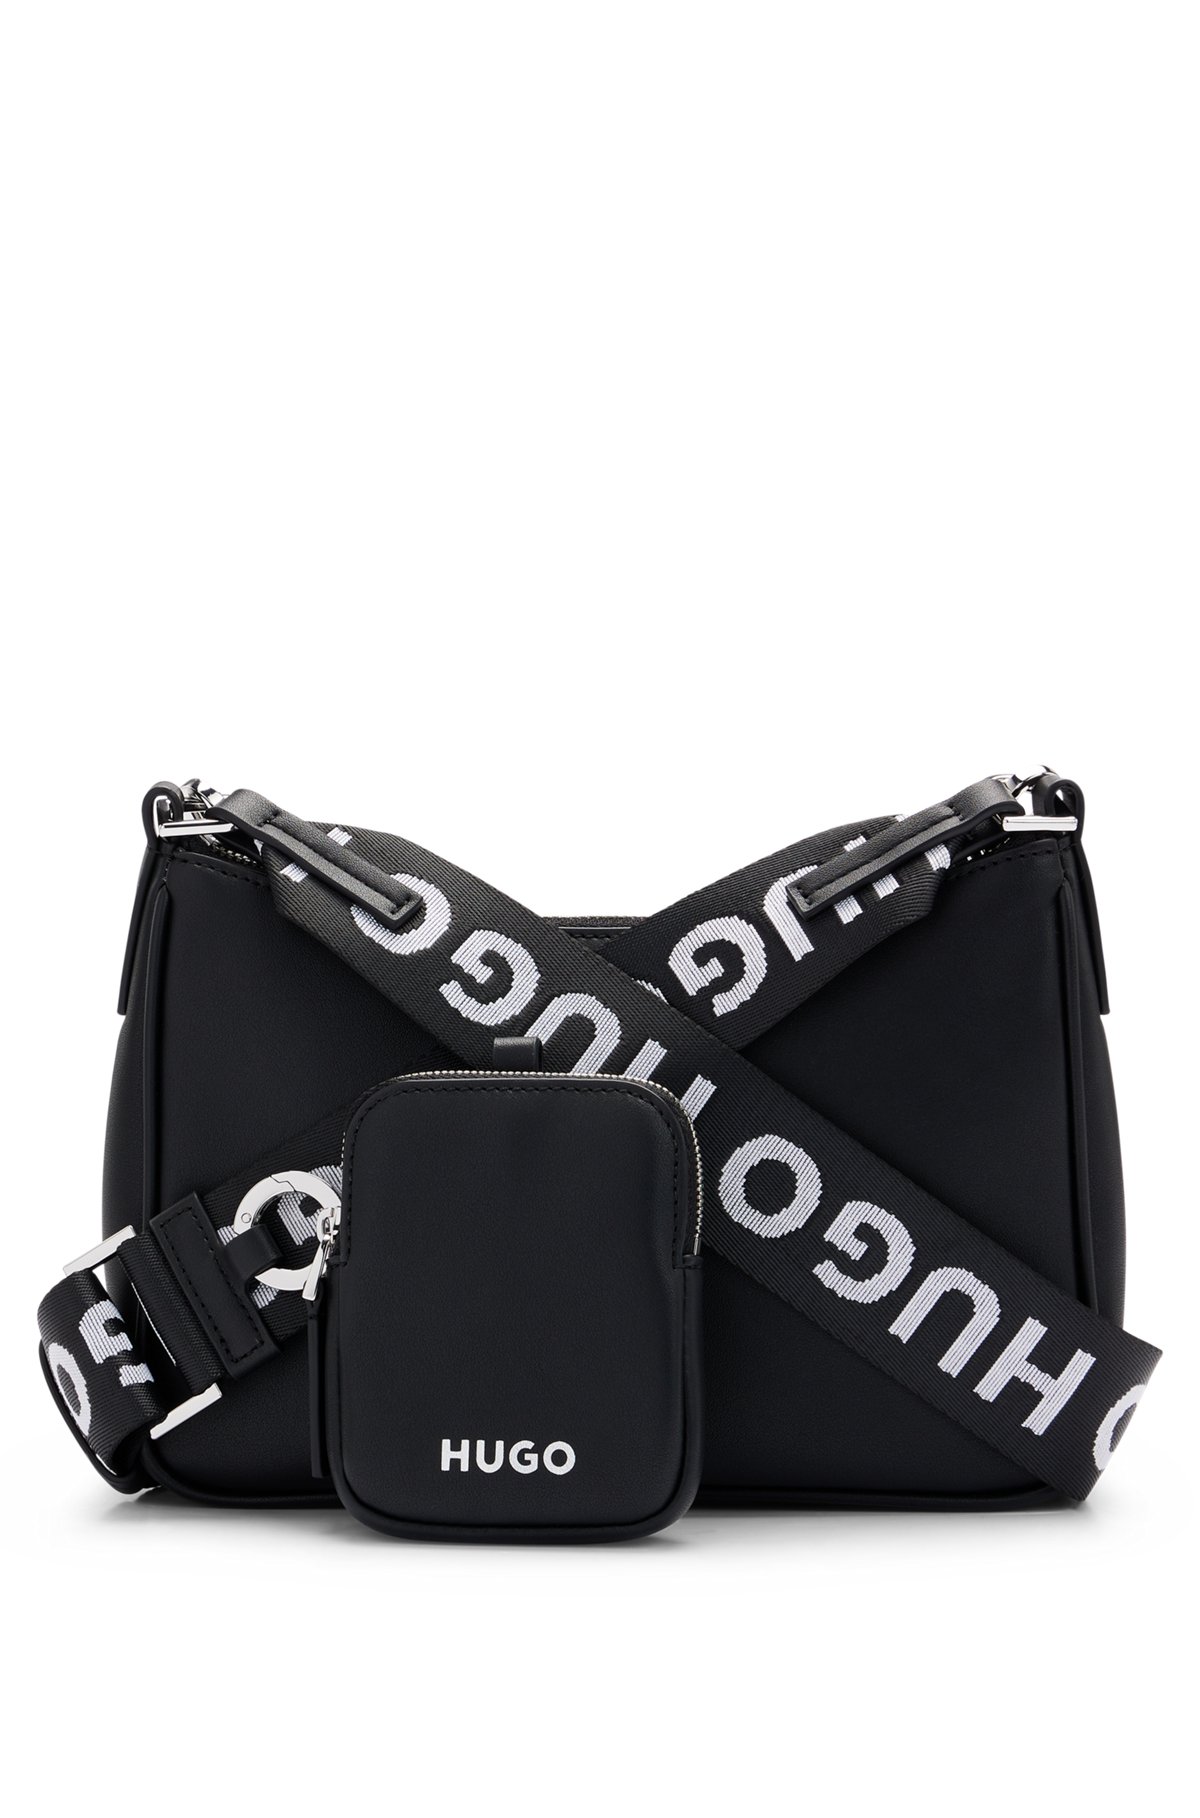 Crossbody bag with detachable pouches and debossed branding, Black